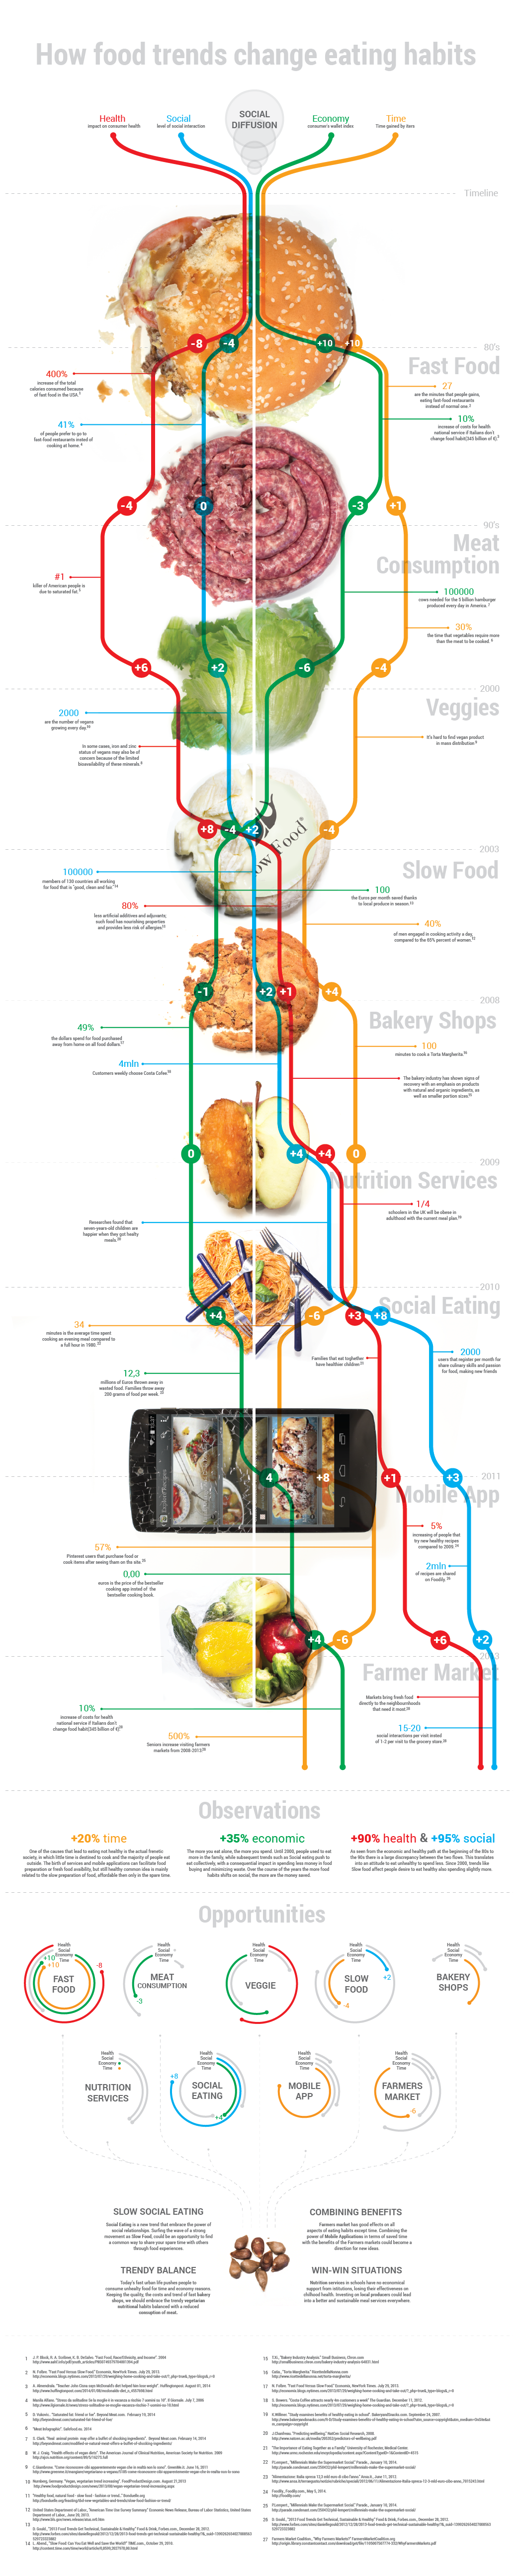 Food  trend Eating  habits expo Expo2015 colors lines infographic multiply Data info eat milano politecnico